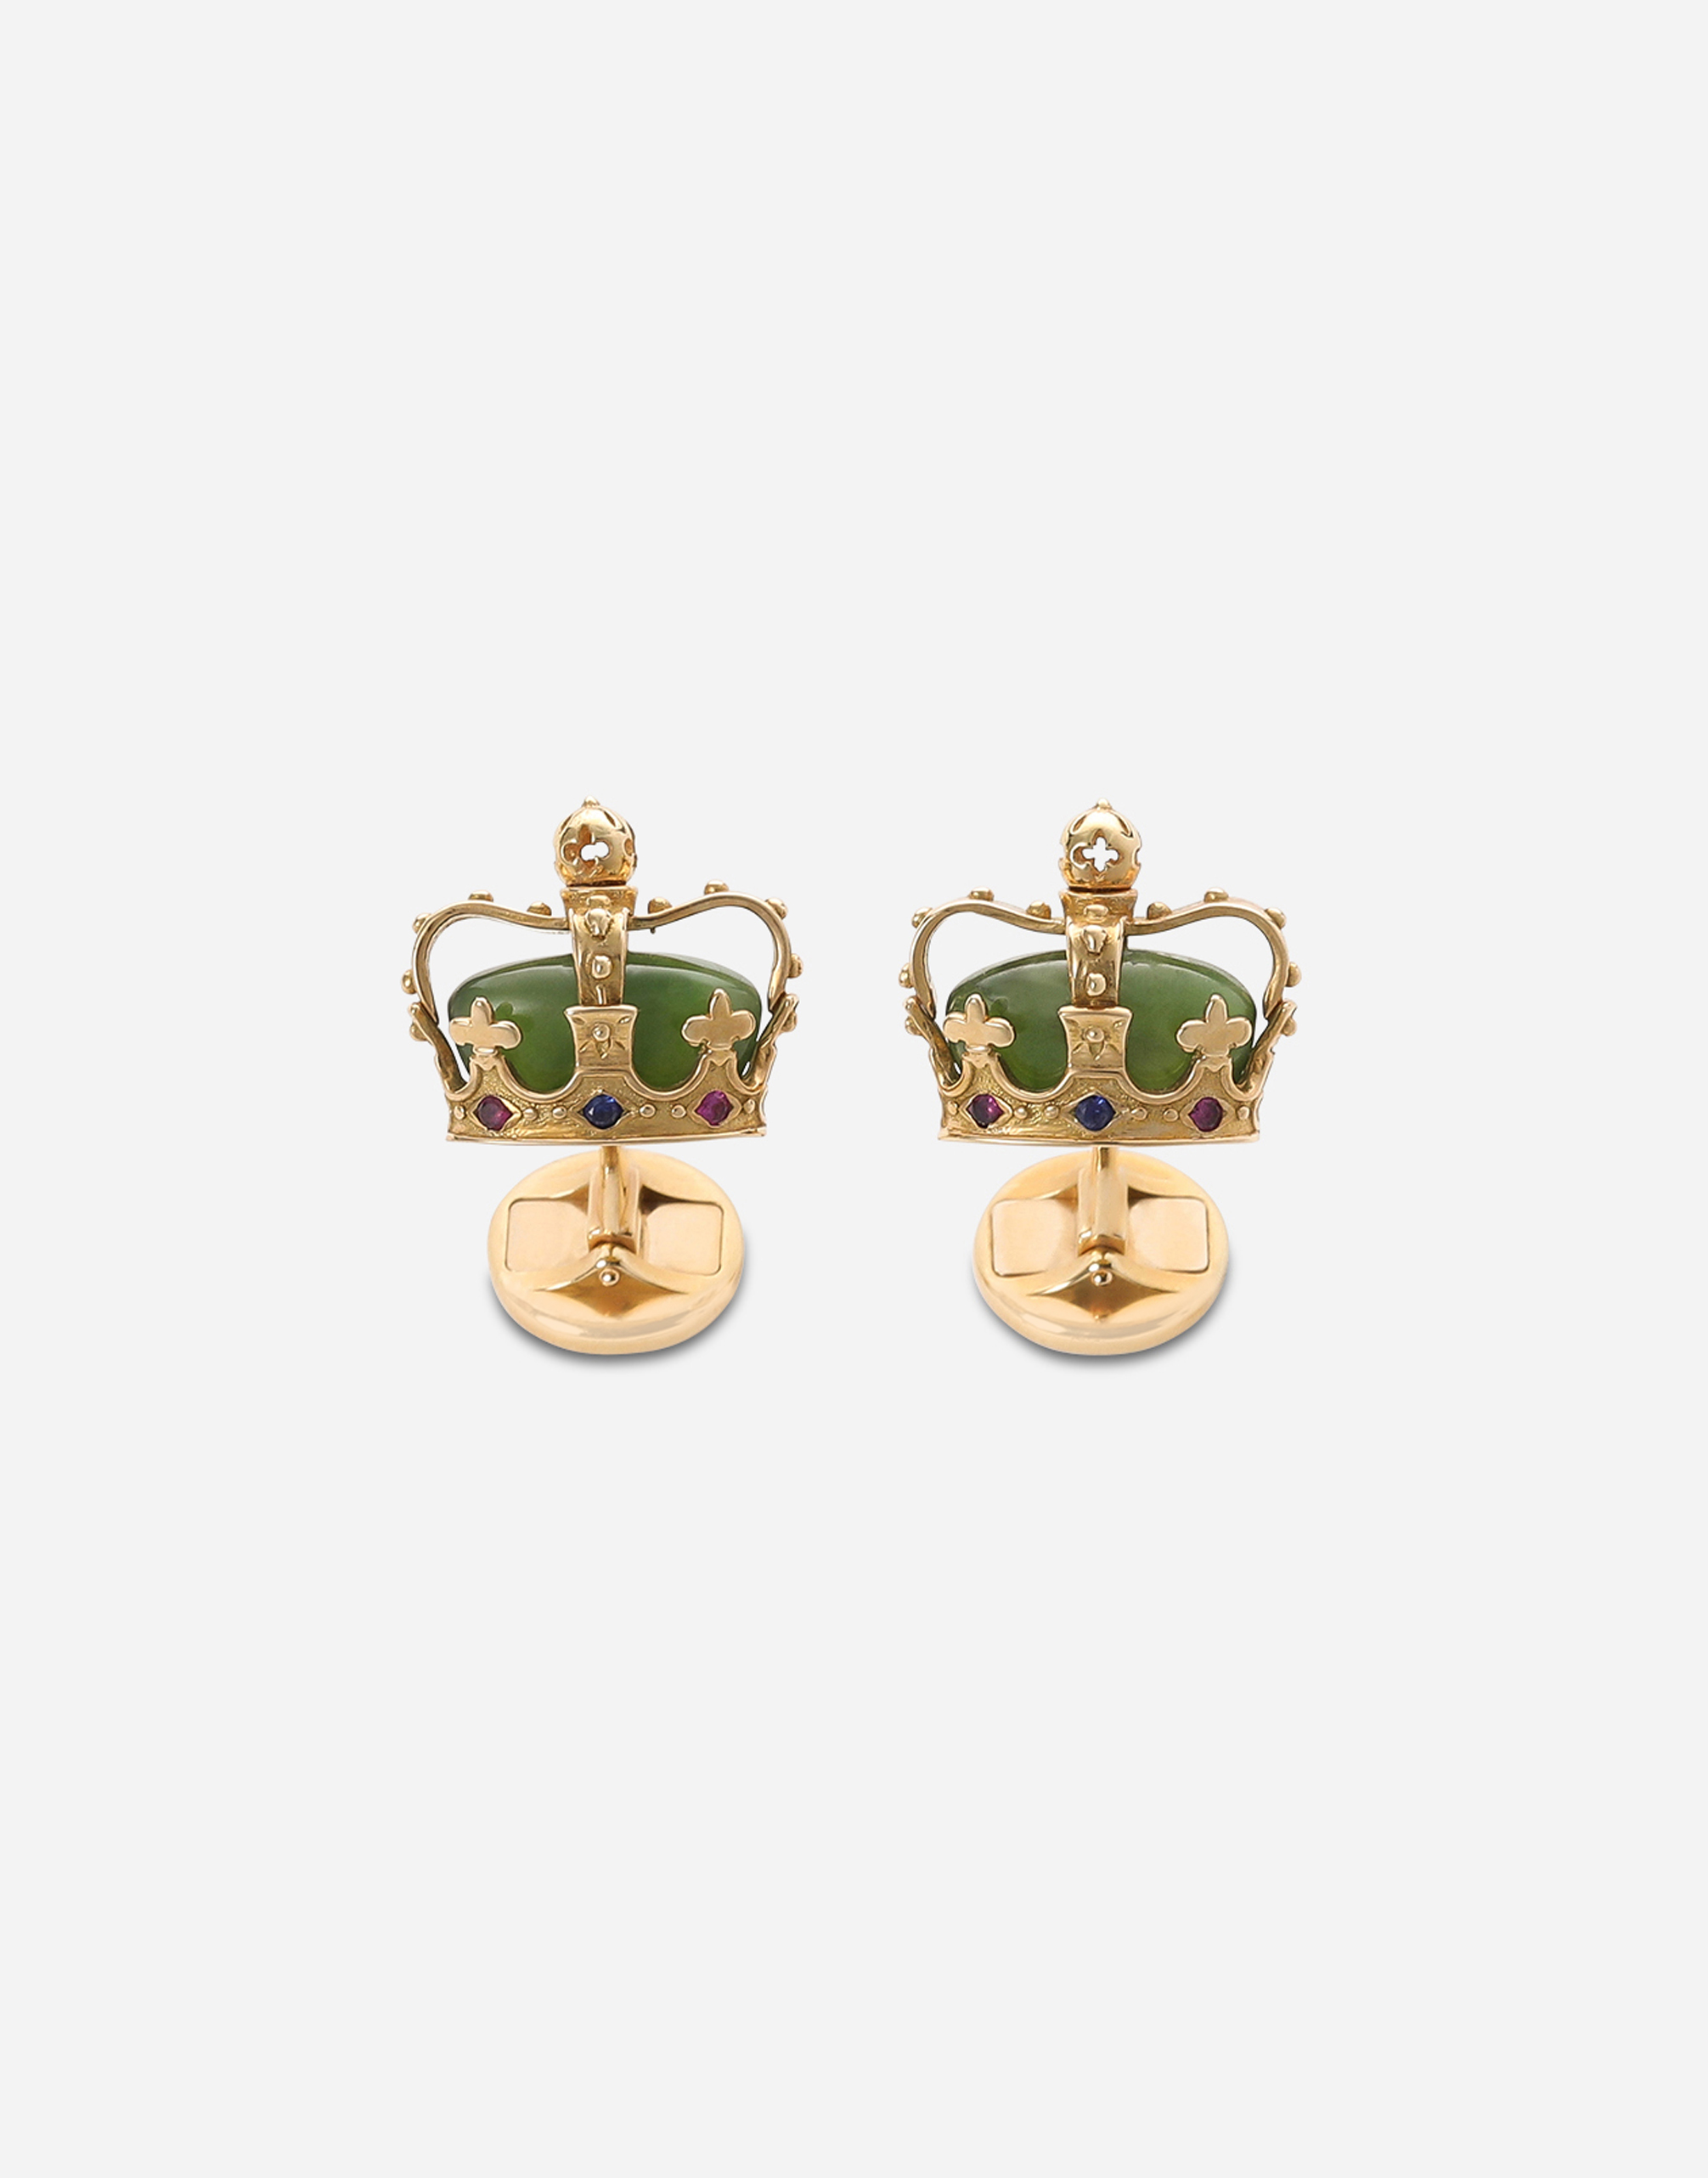 Crown yellow gold cufflinks with green jades in Yellow gold